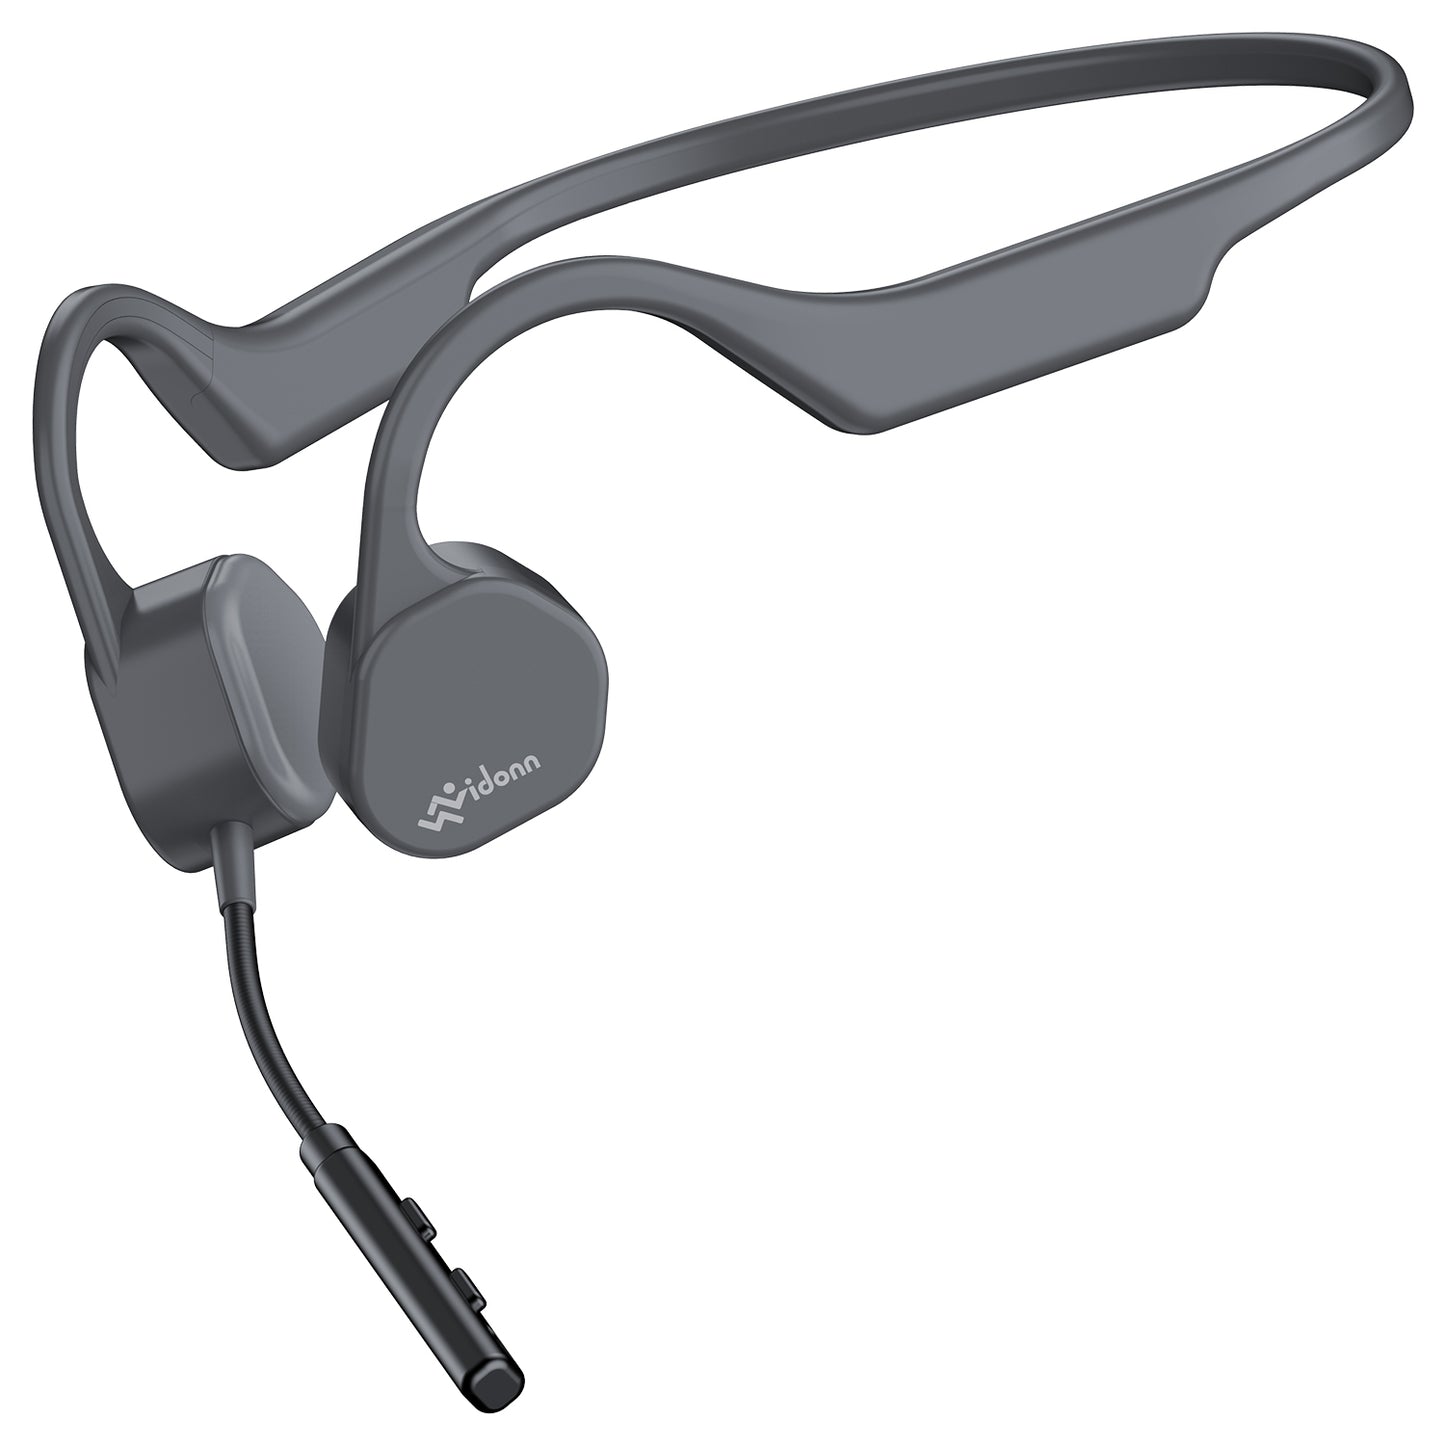 Vidonn Bone Conduction Headphones with Microphone Bluetooth Commercial Use (S/M)